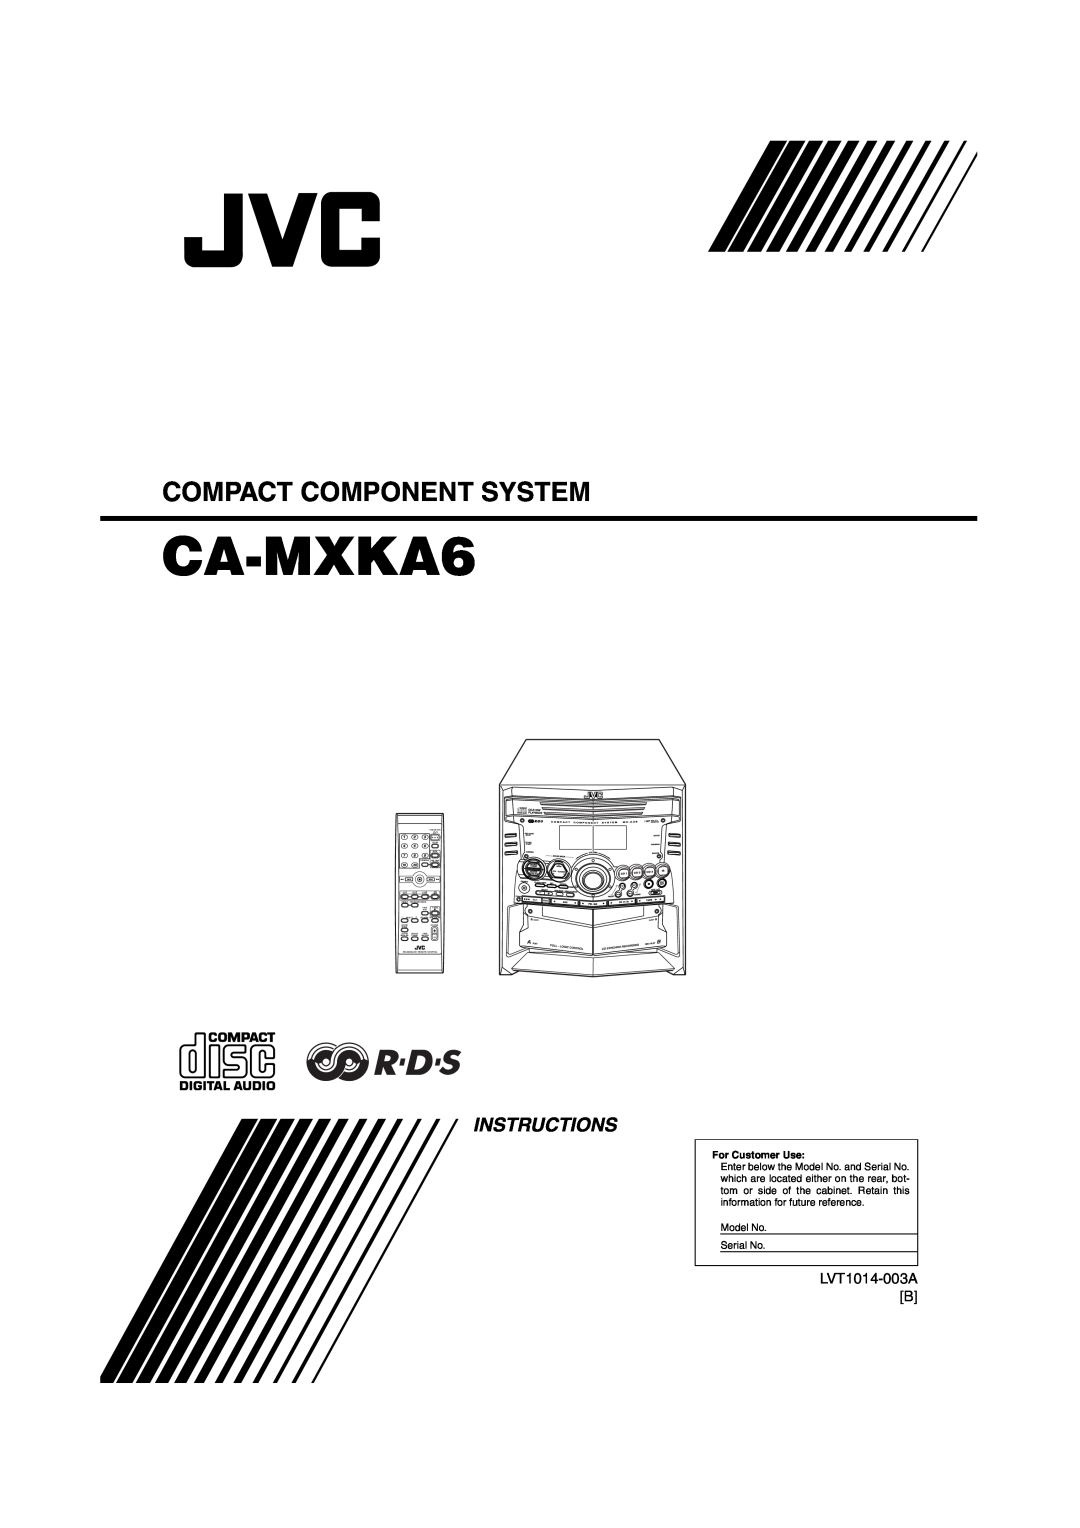 JVC CA-MXKA6 manual Compact Component System, Instructions, LVT1014-003AB, For Customer Use, Model No Serial No 